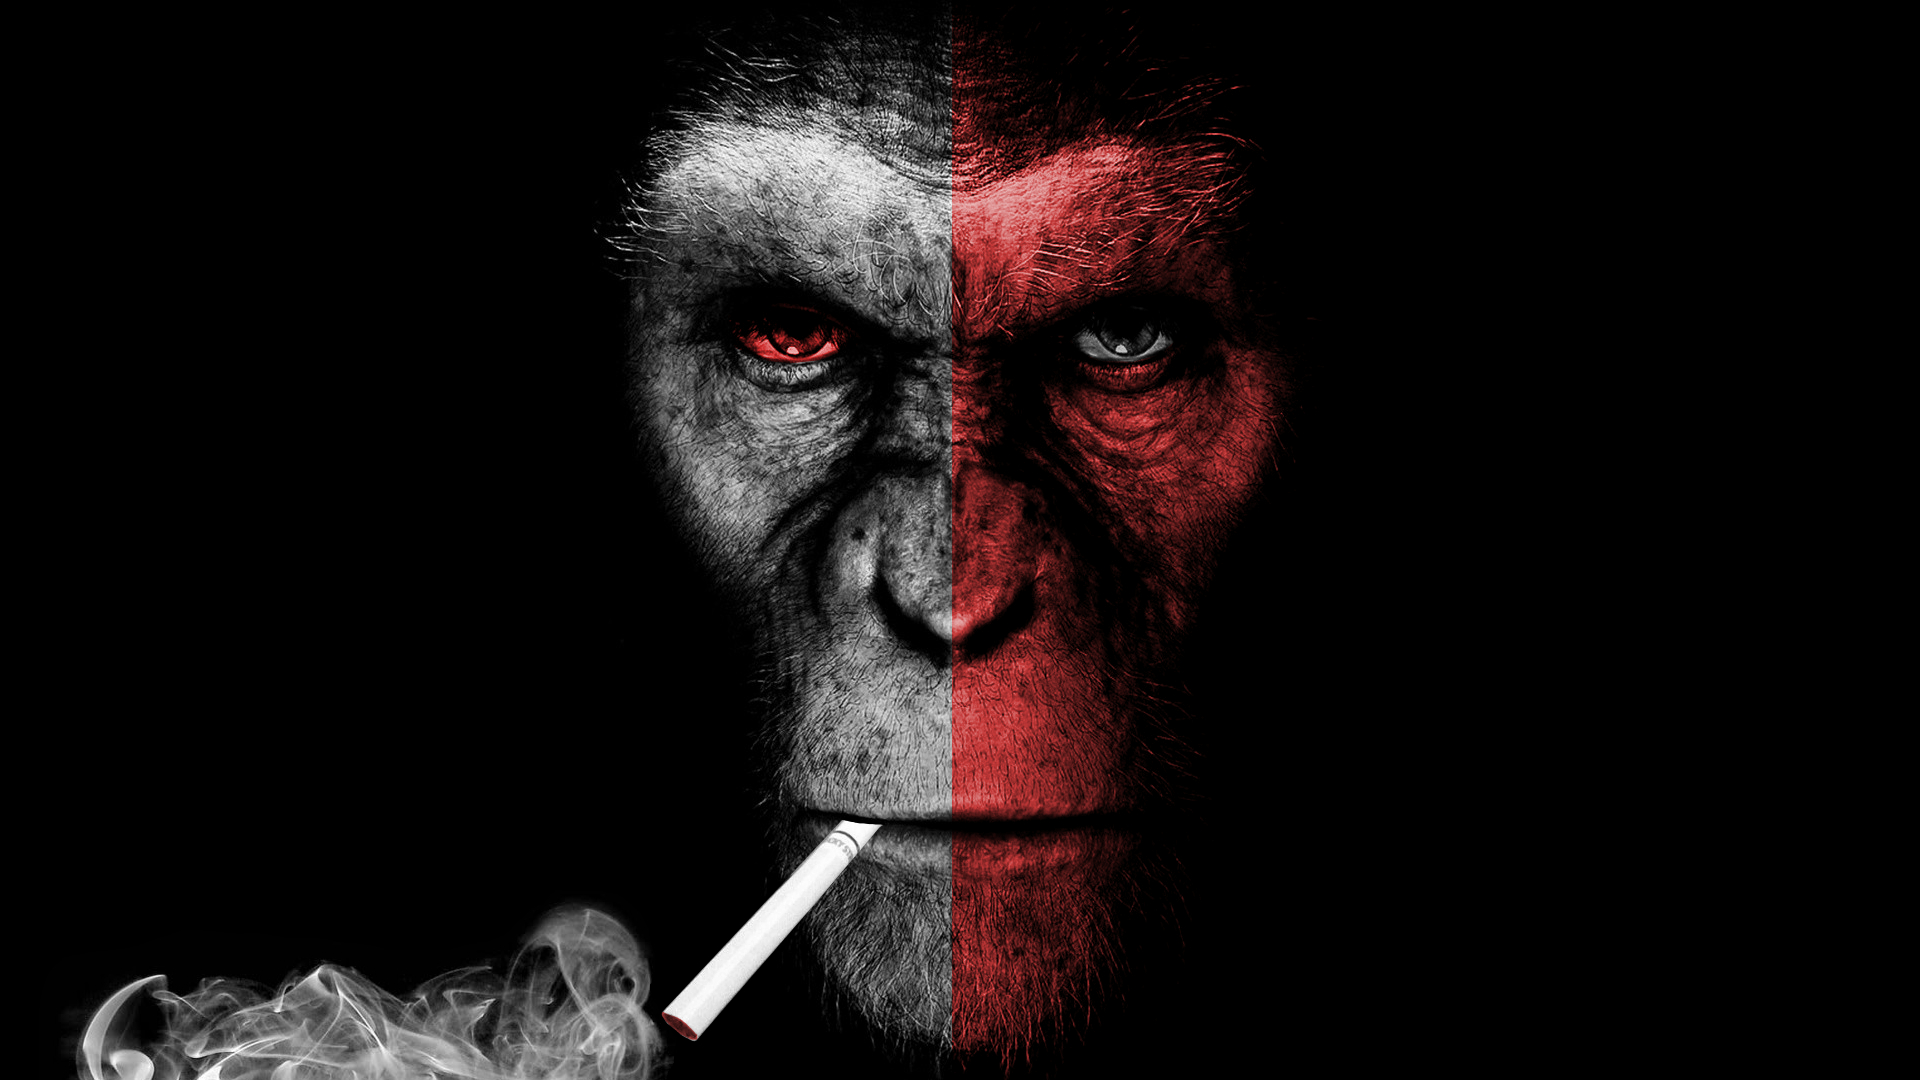 Wallpaper Smoke Wallpaper - Planet Of The Apes Black And White , HD Wallpaper & Backgrounds